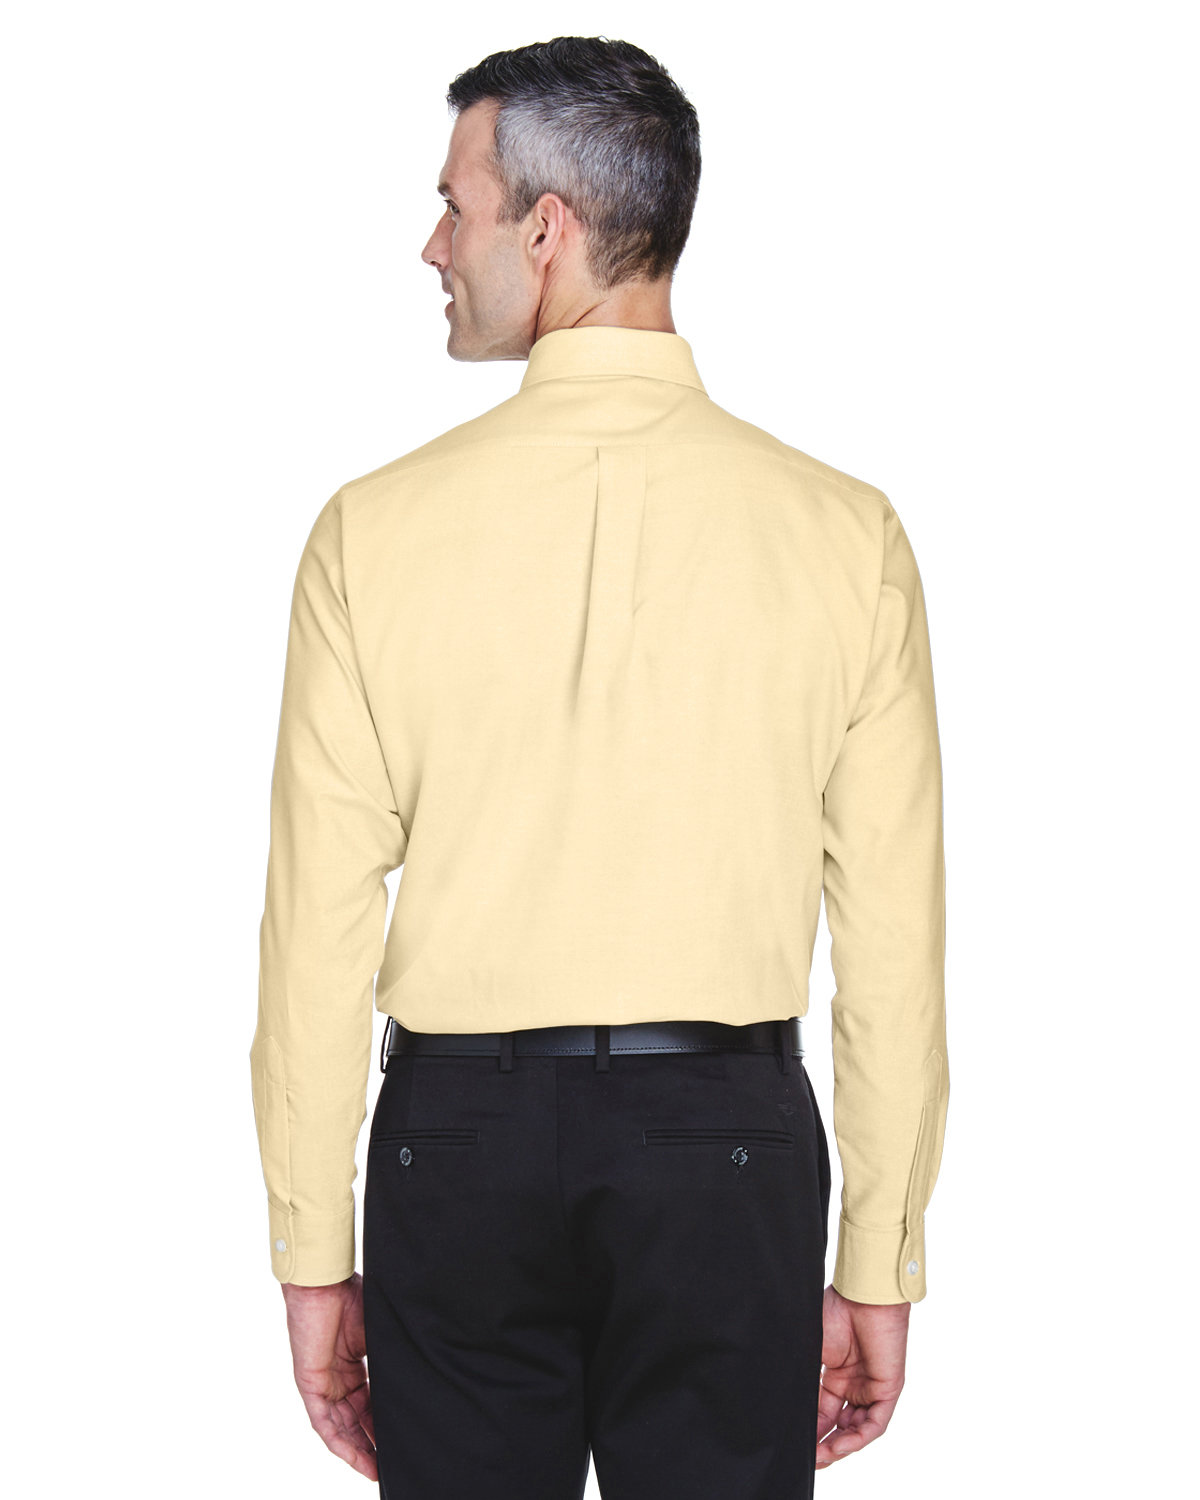 UltraClub Men's Classic Wrinkle-Resistant Long-Sleeve Oxford - image 2 of 3